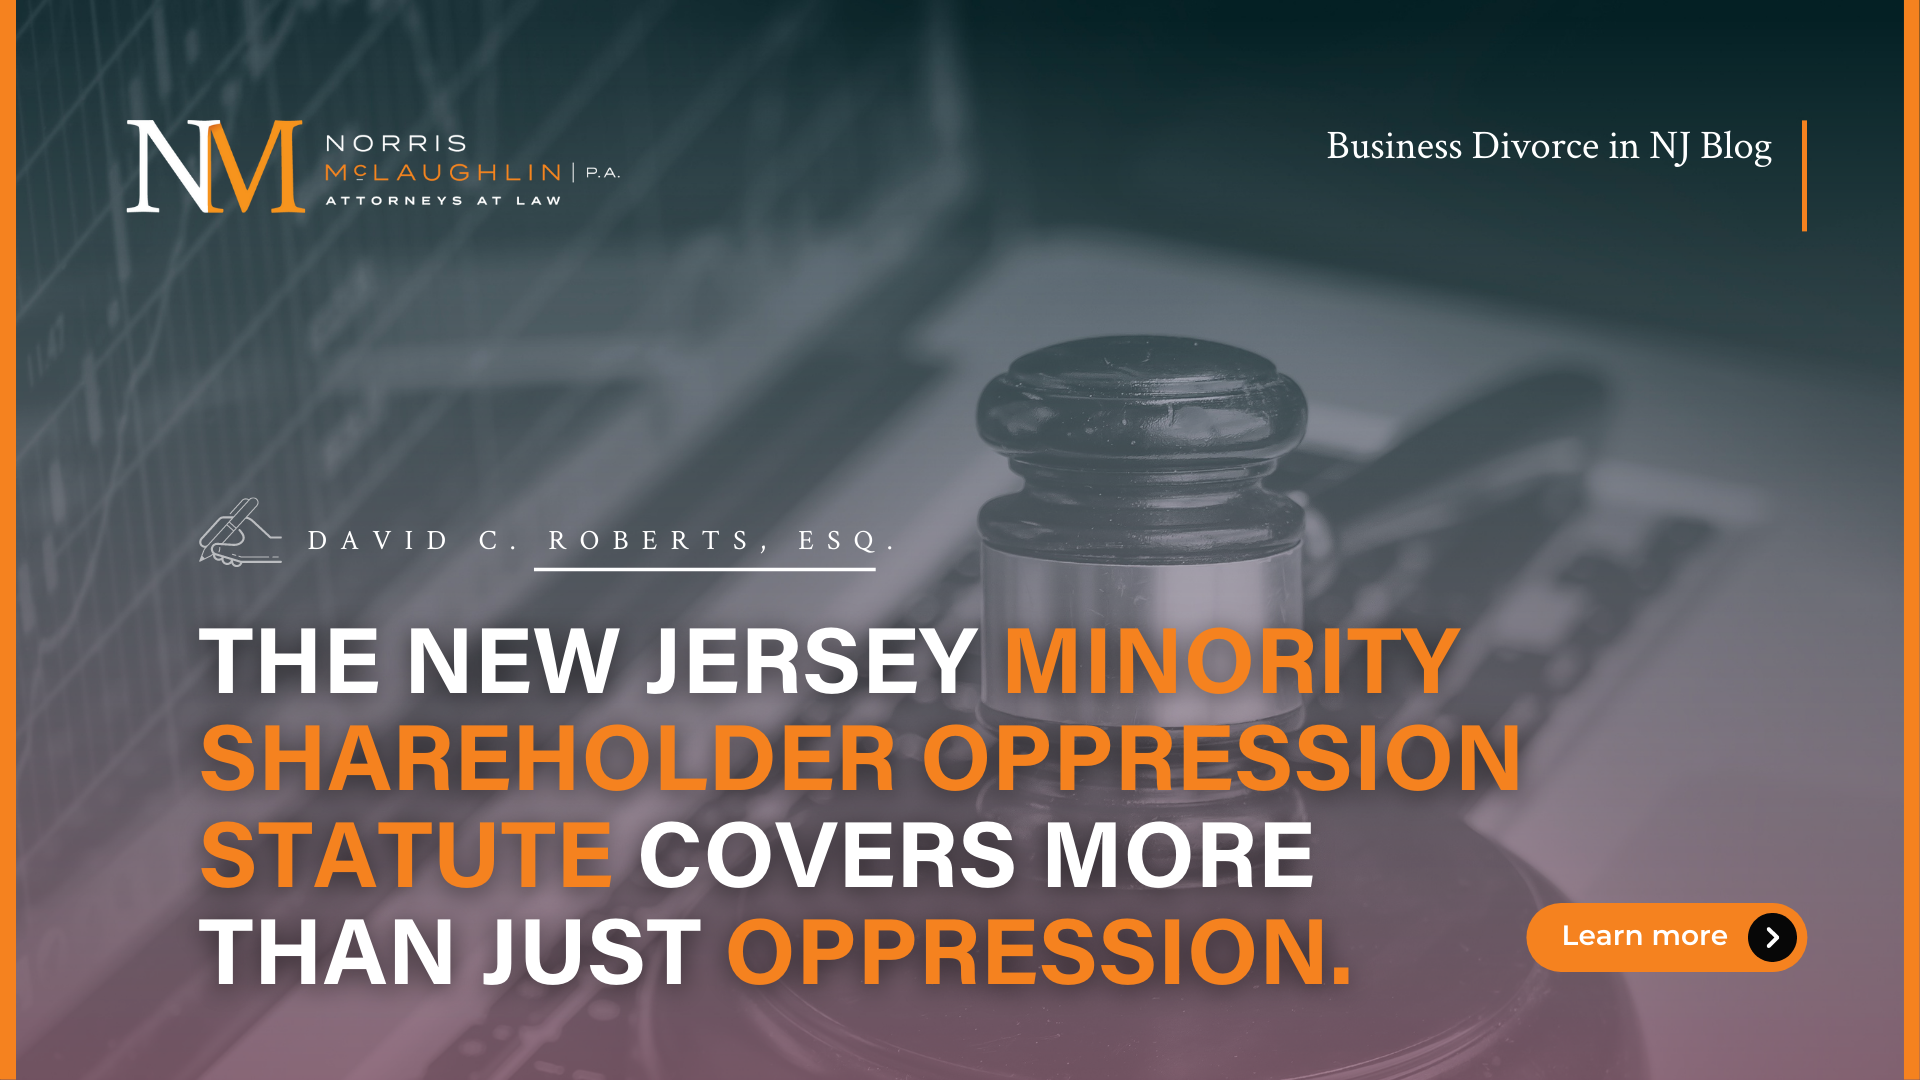 The New Jersey Minority Shareholder Oppression Statute Covers More Than Just Oppression